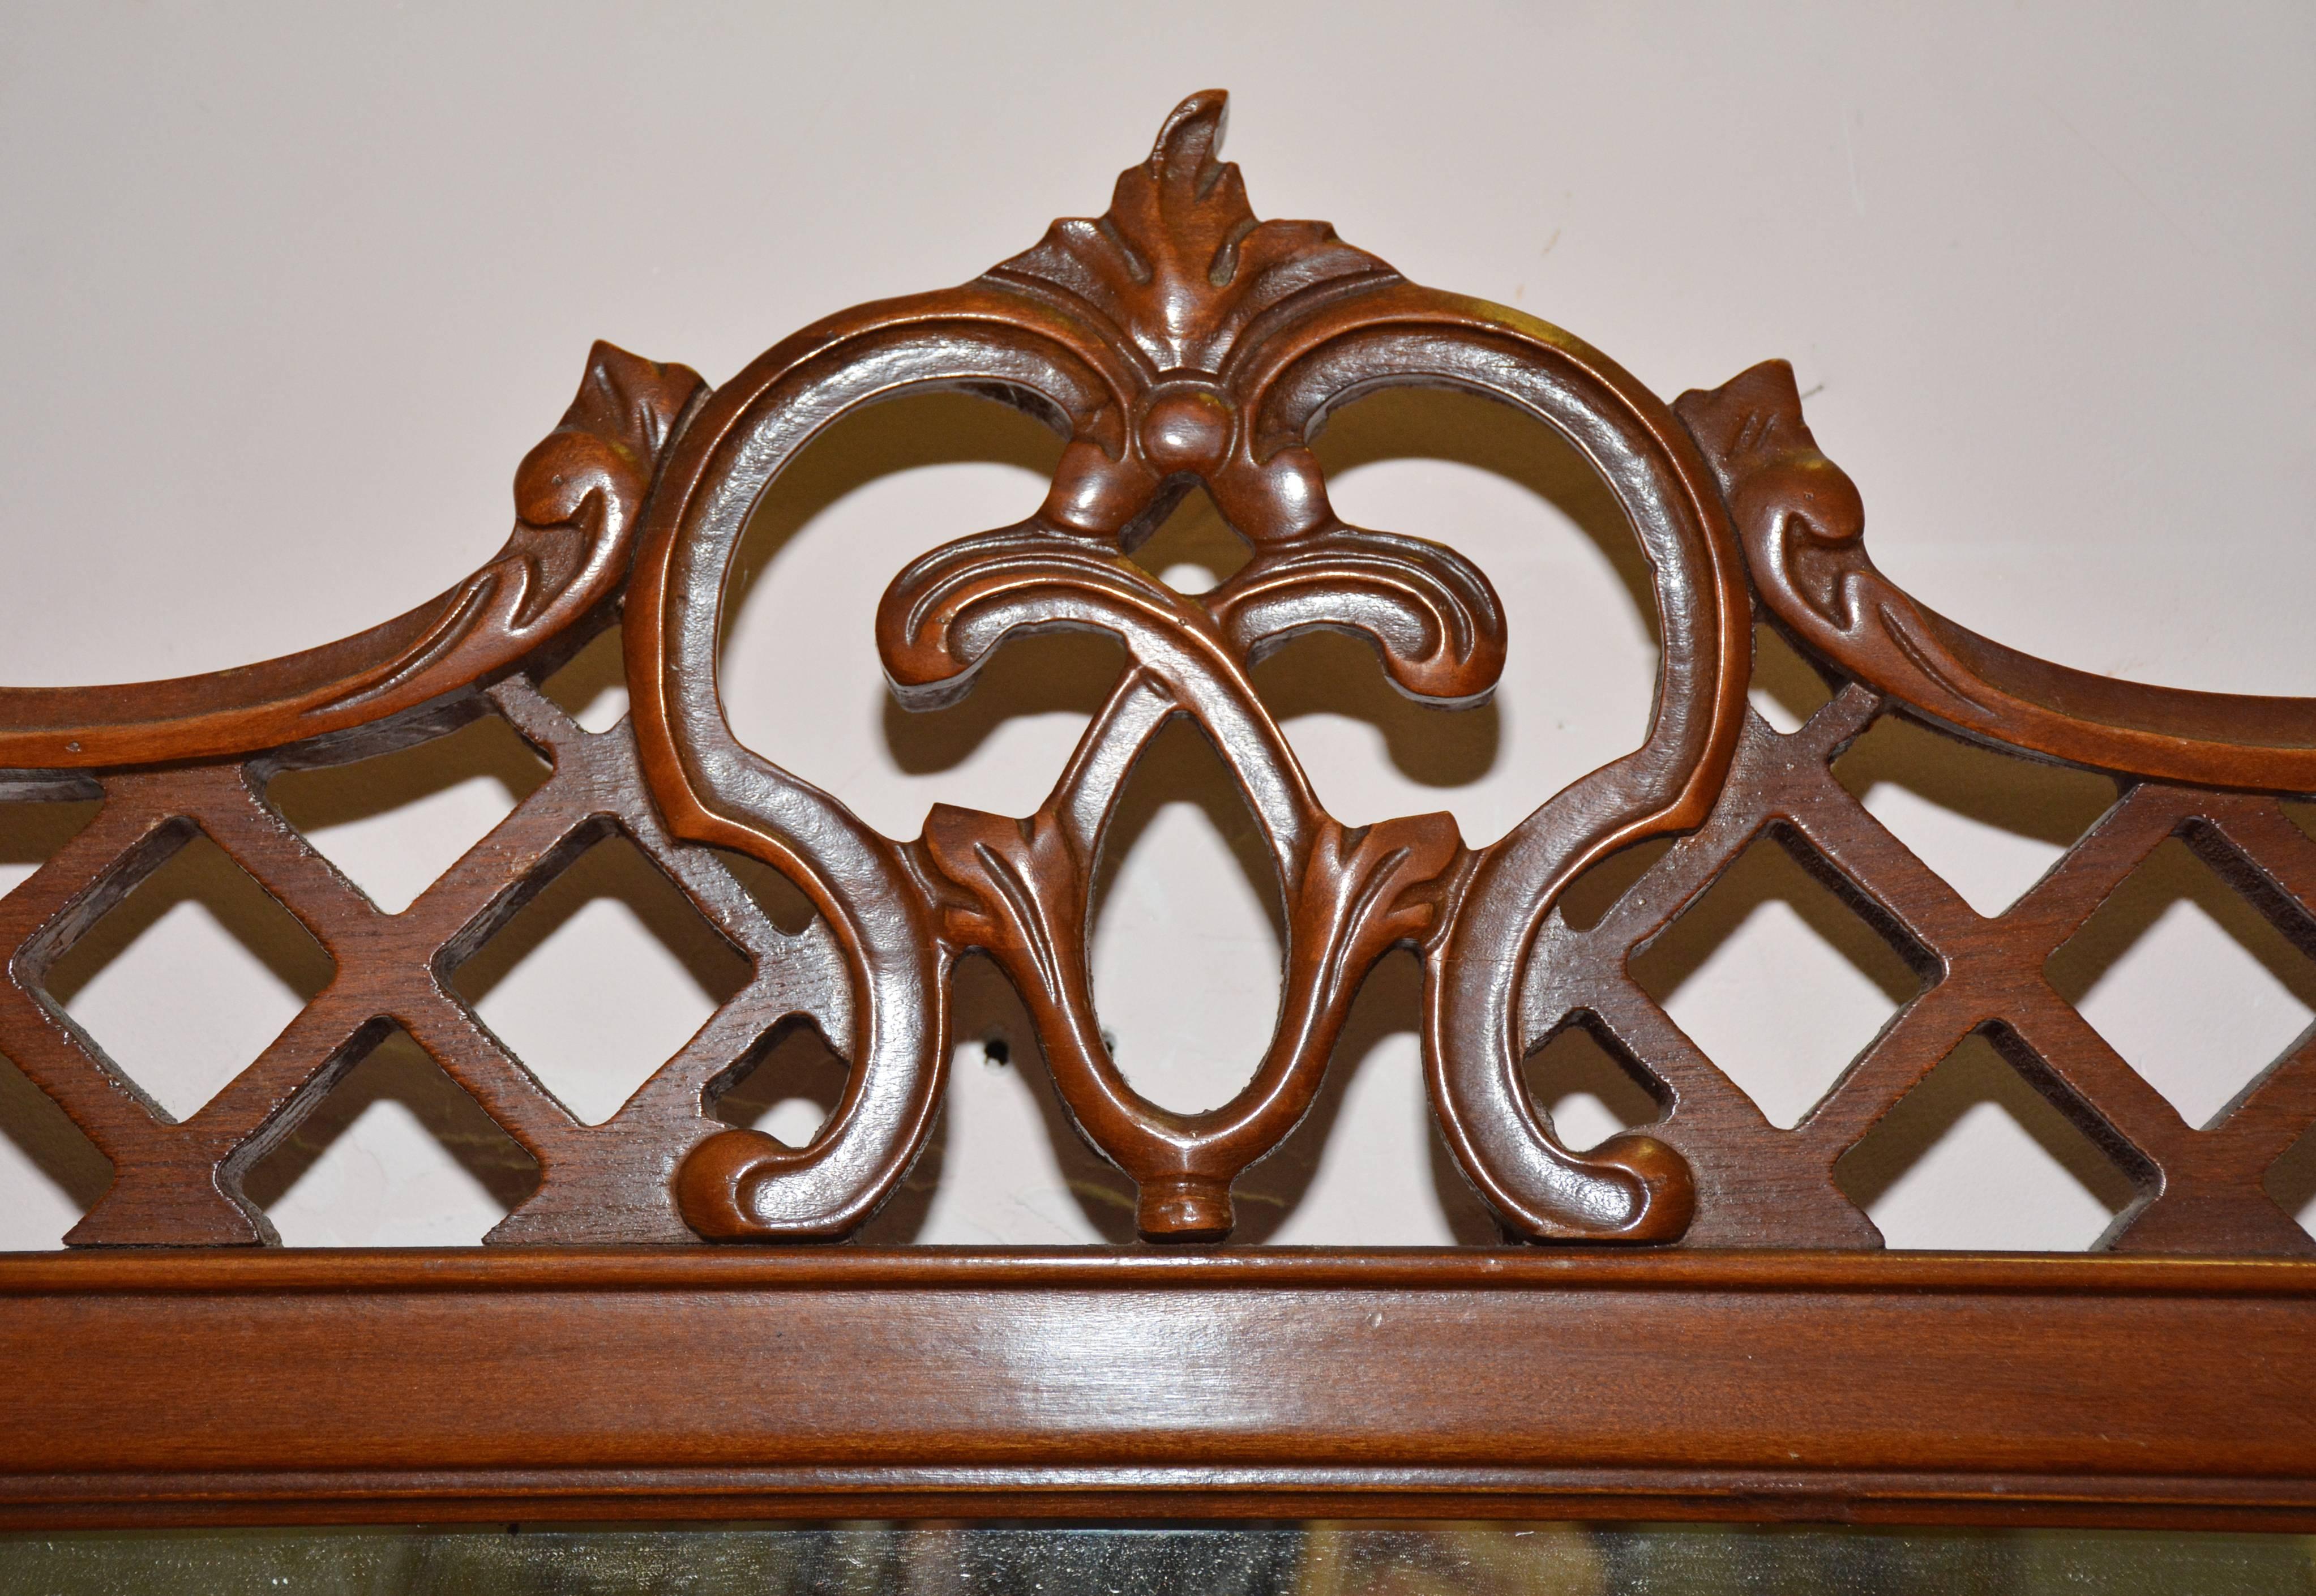 Pair of vintage neoclassical Chippendale style mirrors decorated with fretwork pediments and finials, faux bamboo sides and centered fretwork and ball finials at the bottom. The backs are covered in plywood and are wired for hanging.